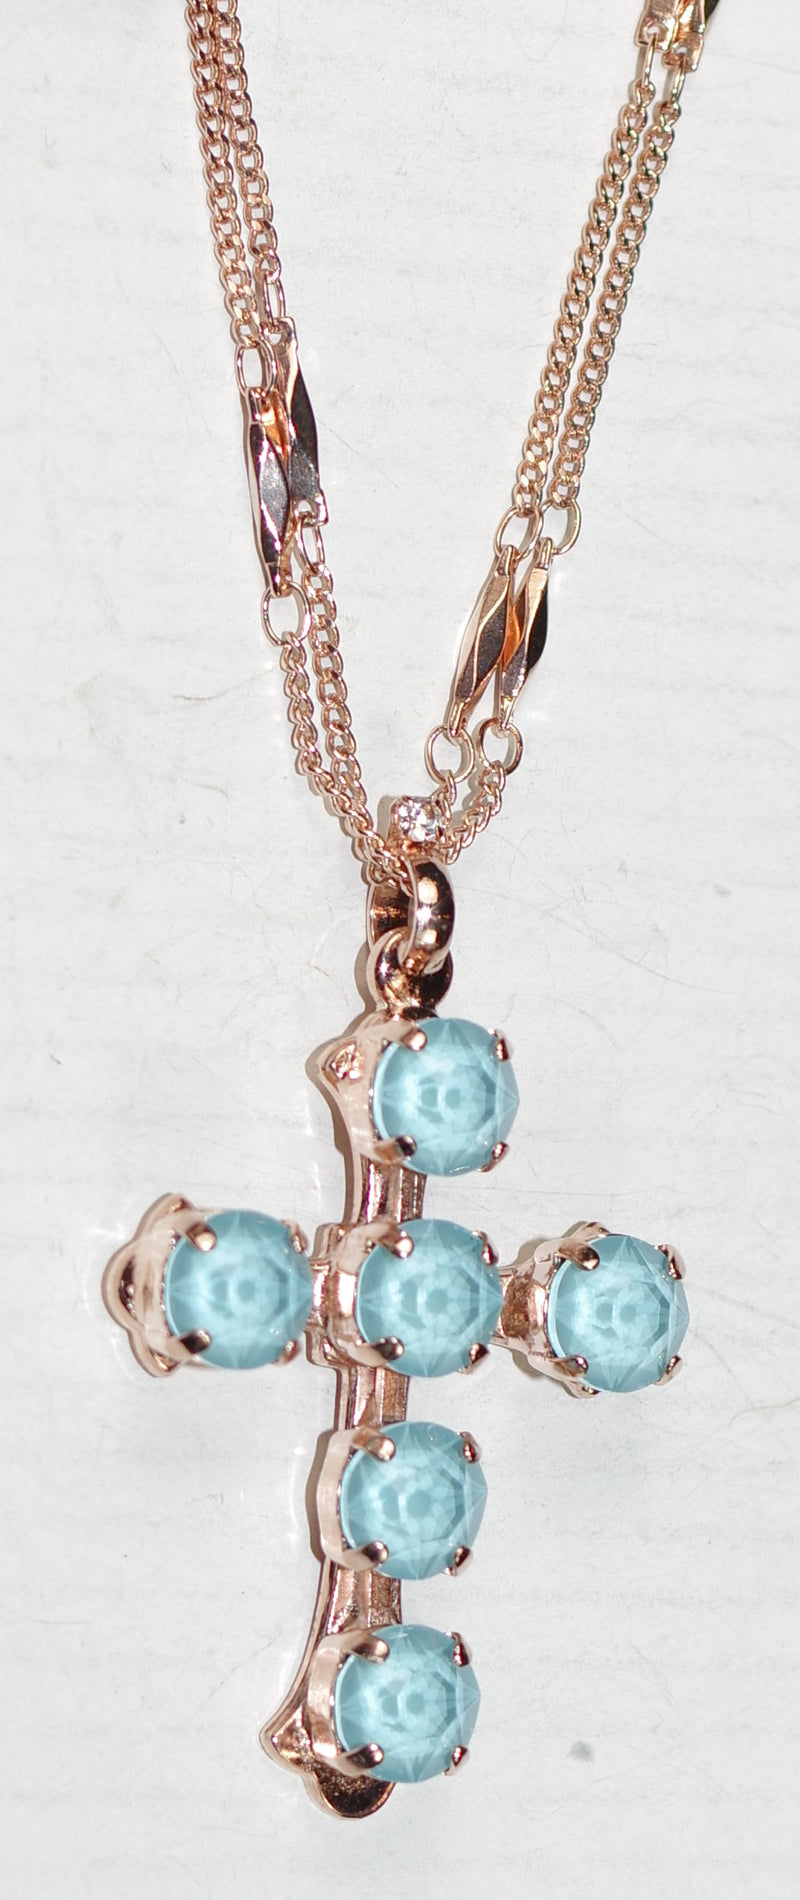 MARIANA CROSS PENDANT ELECTRIC BLUE: blue stones in rose gold setting, 18" double chain